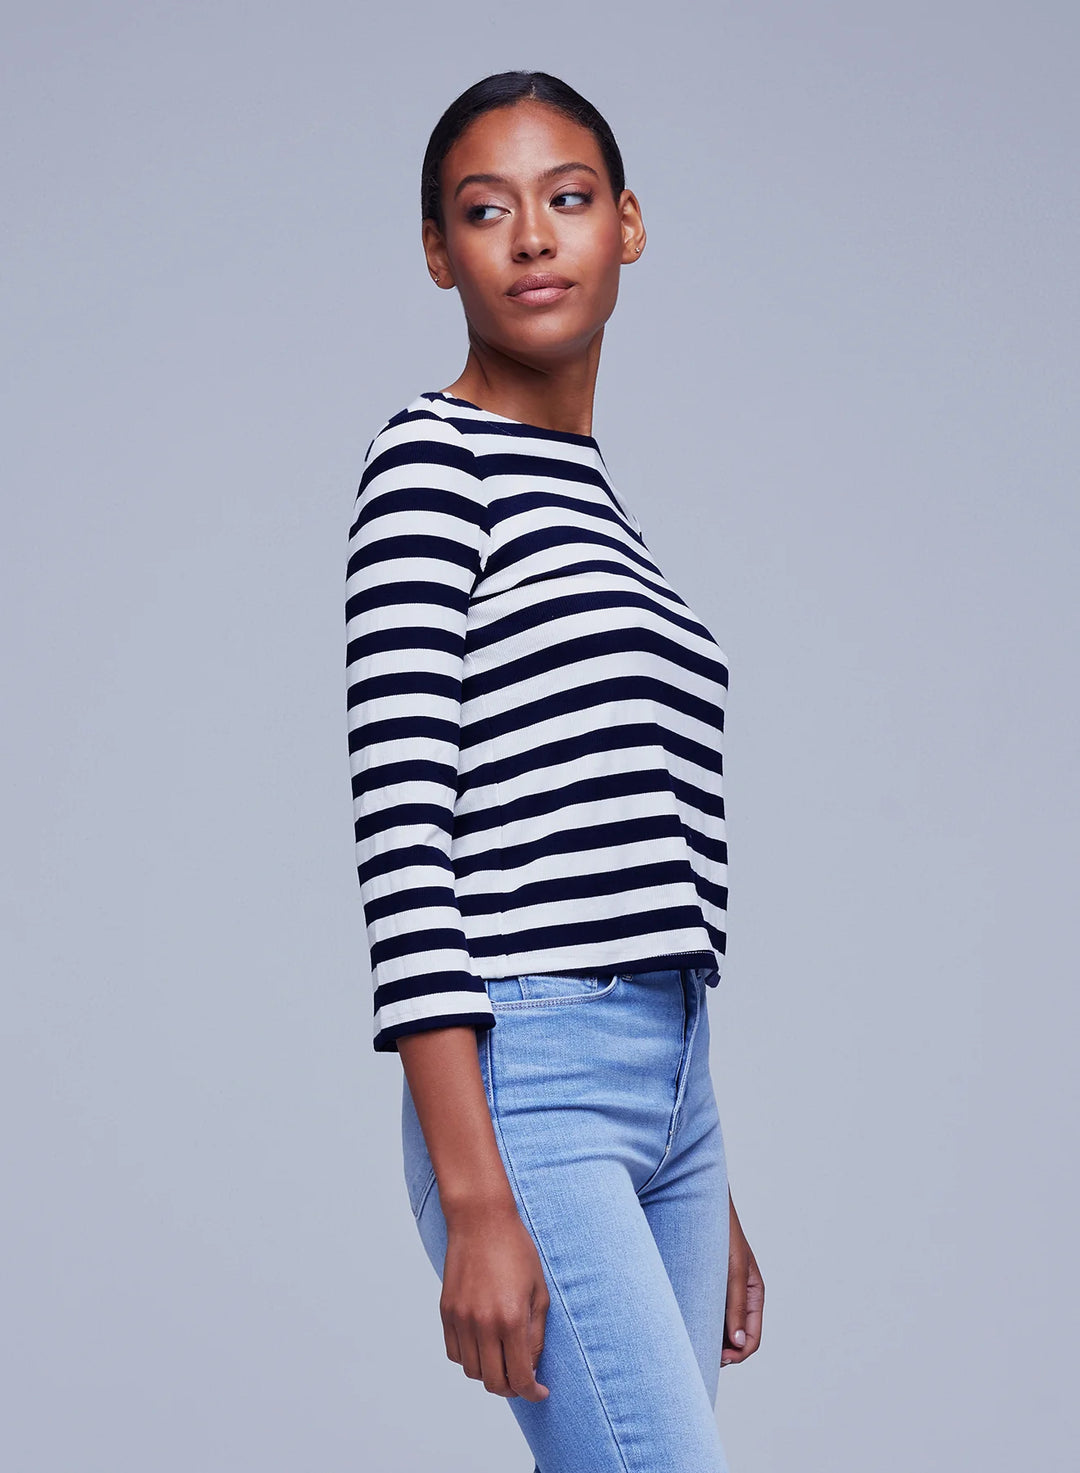 LUCILLE STRIPED TOP - L'AGENCE